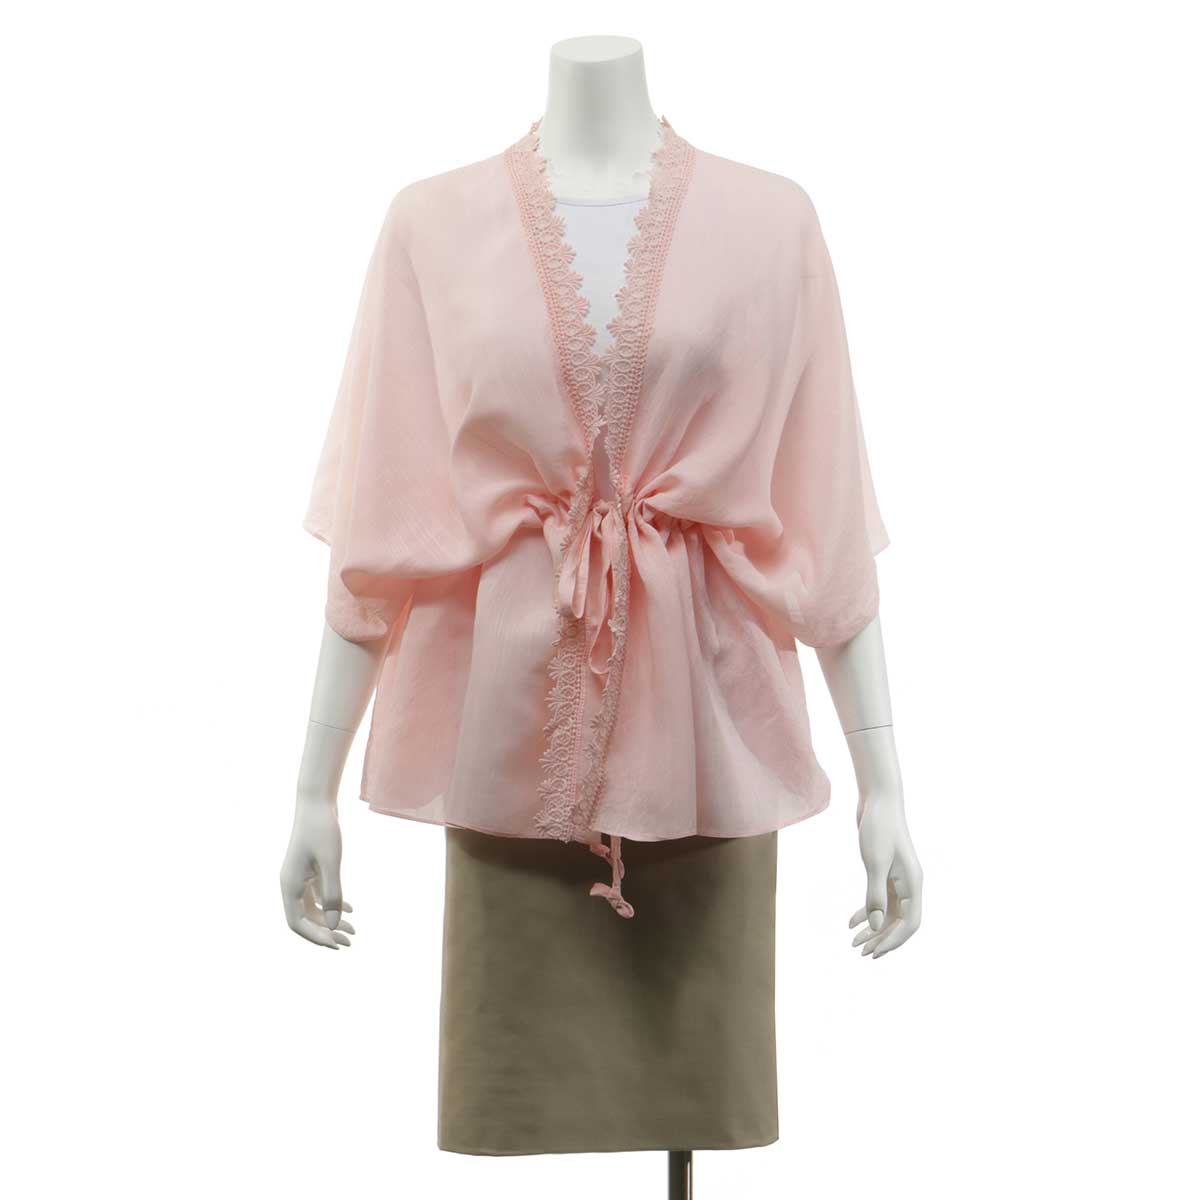 Pink Tunic with Lace and Adjustable Tie 36"x26" 50sp